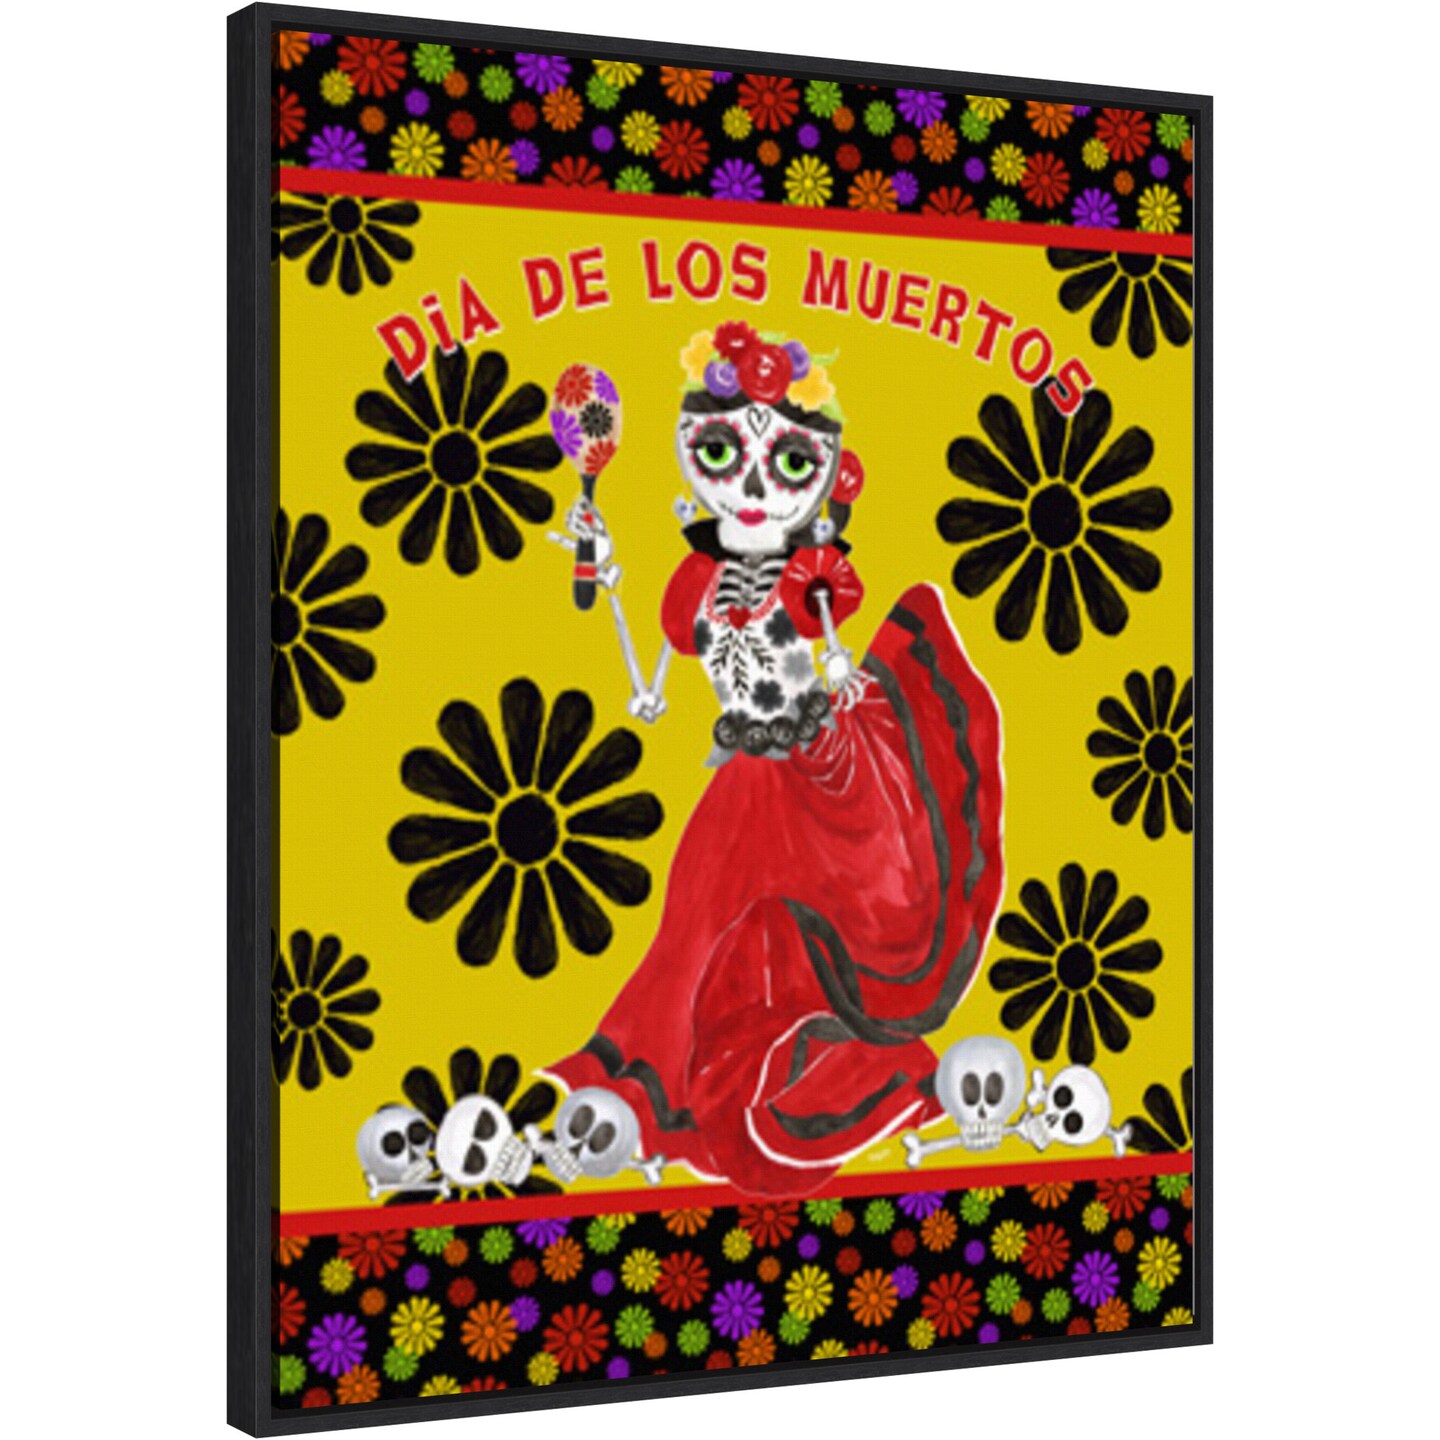 Day of the Dead portrait III-Dancing Woman gold &#x26; black by Tara Reed 23-in. W x 28-in. H. Canvas Wall Art Print Framed in Black